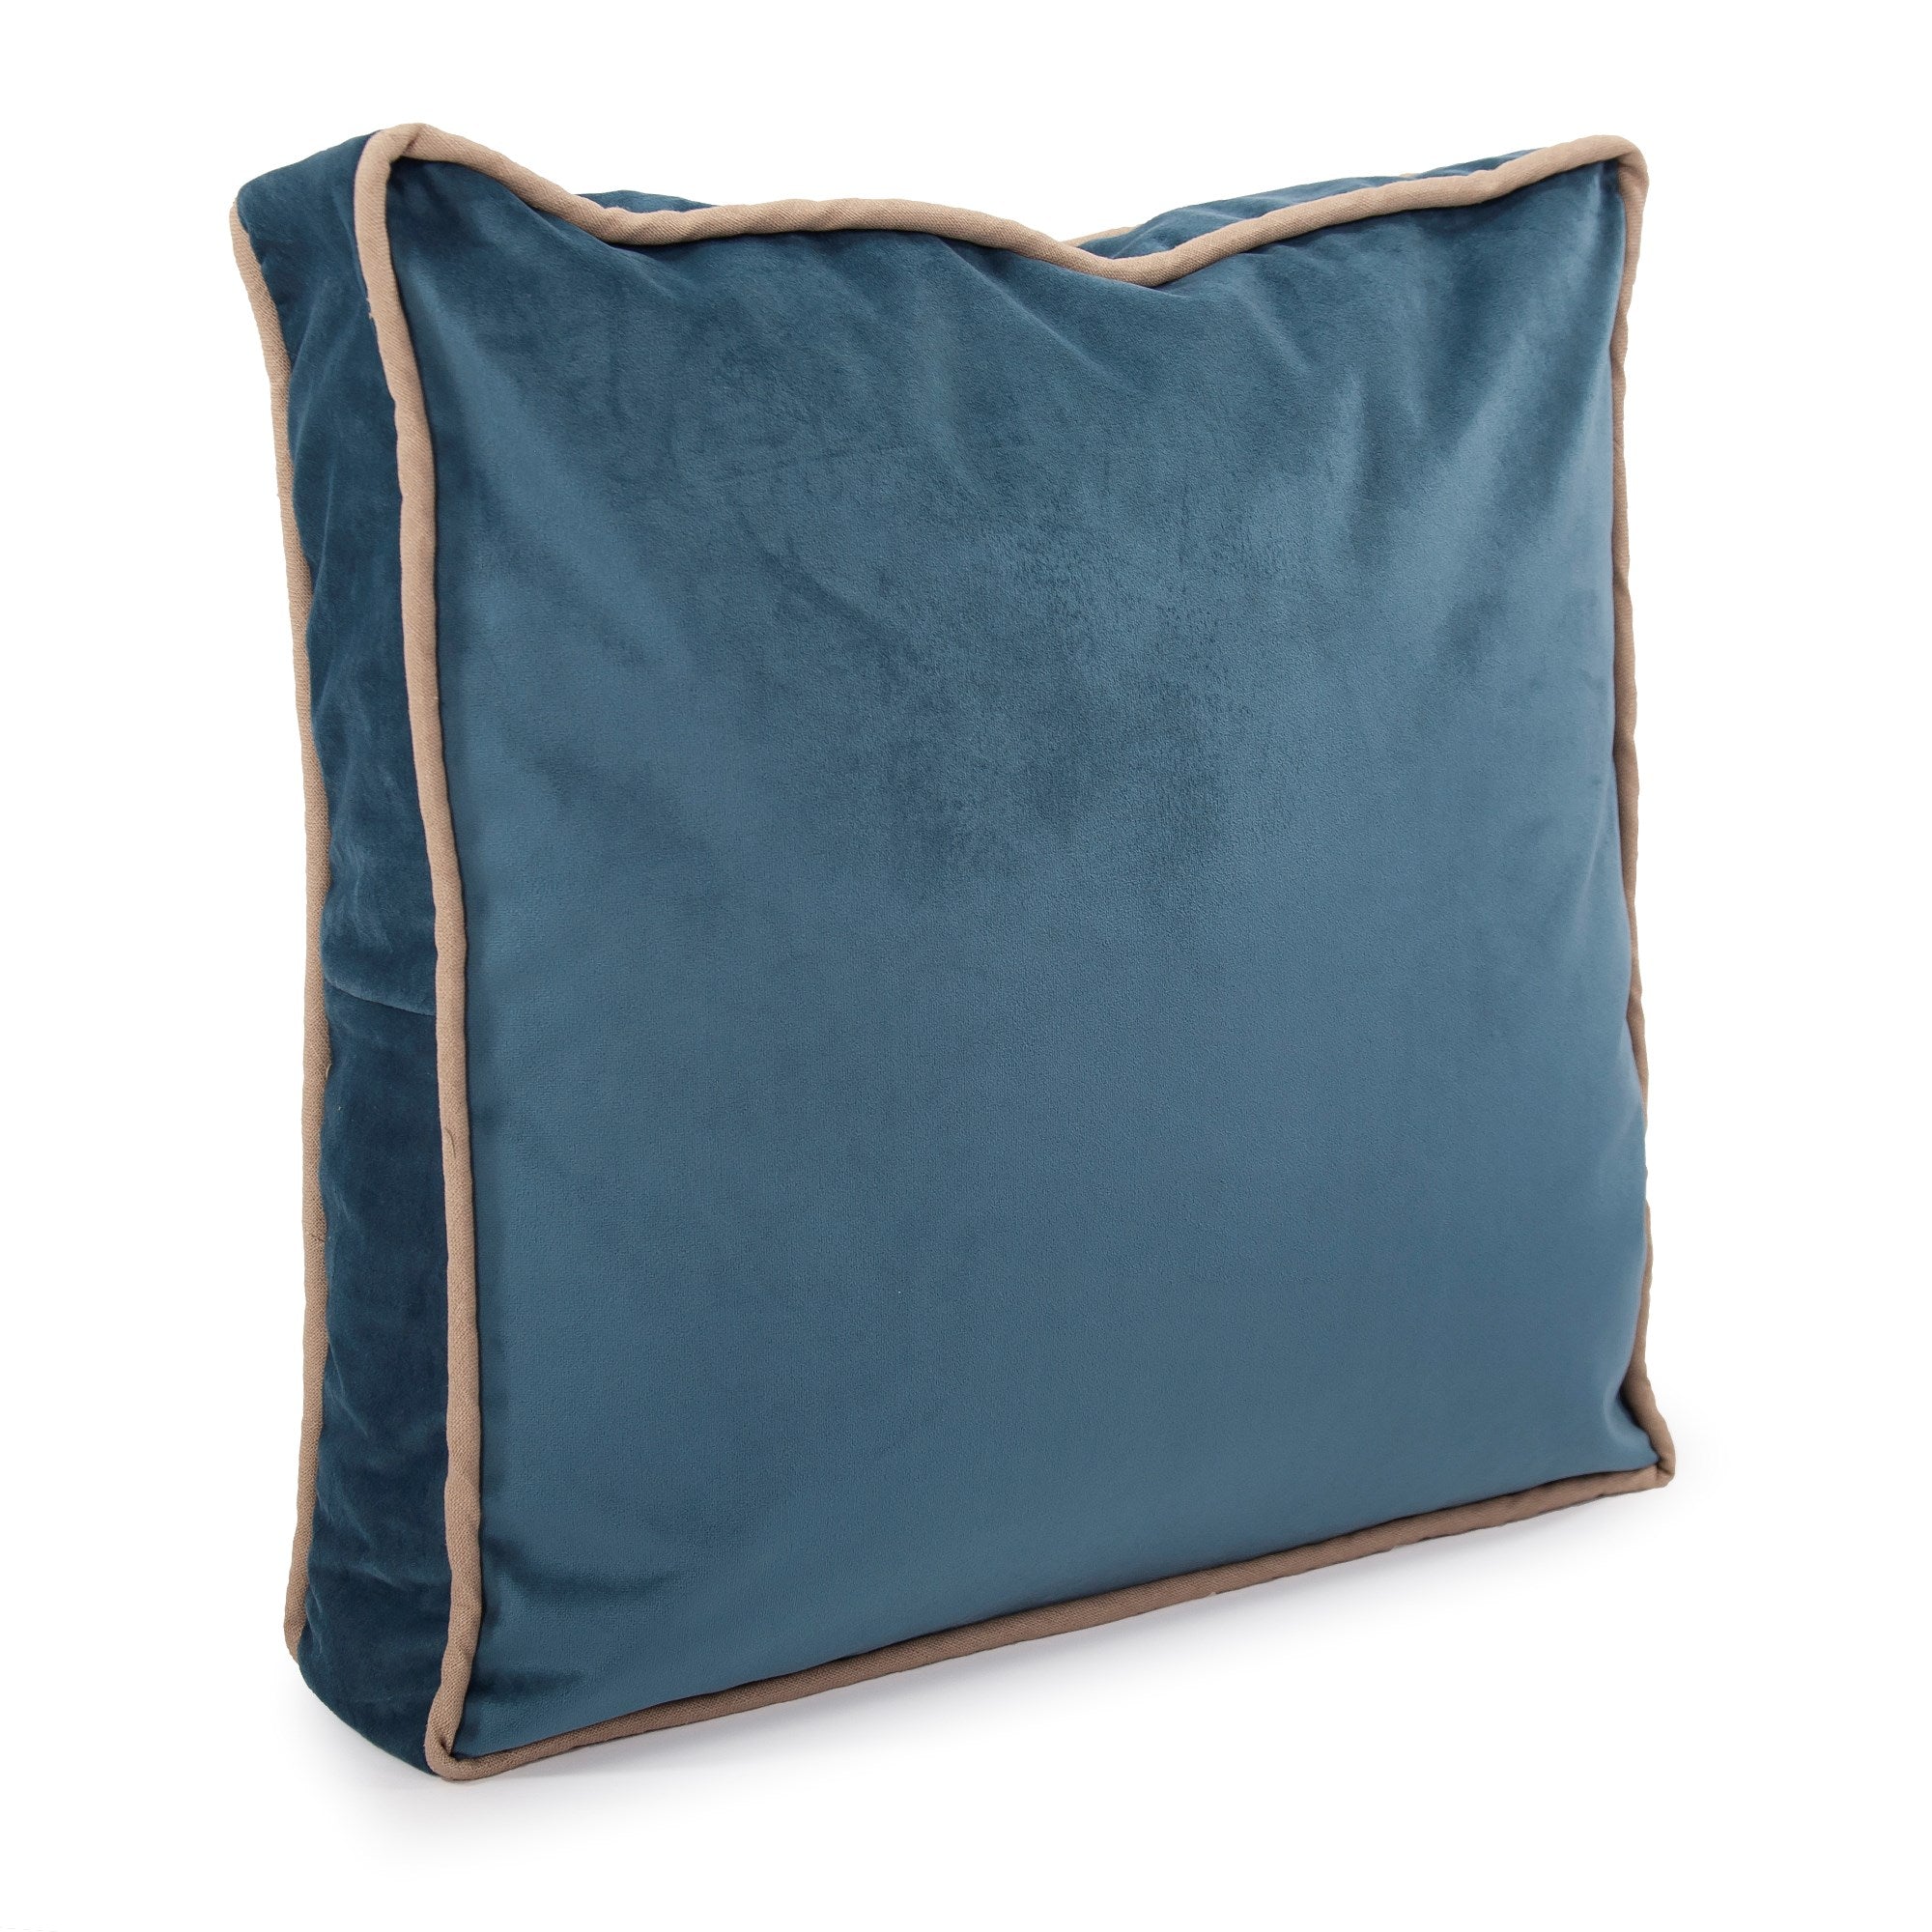 Gusseted Bella Teal Down Pillow- 20" x 20"